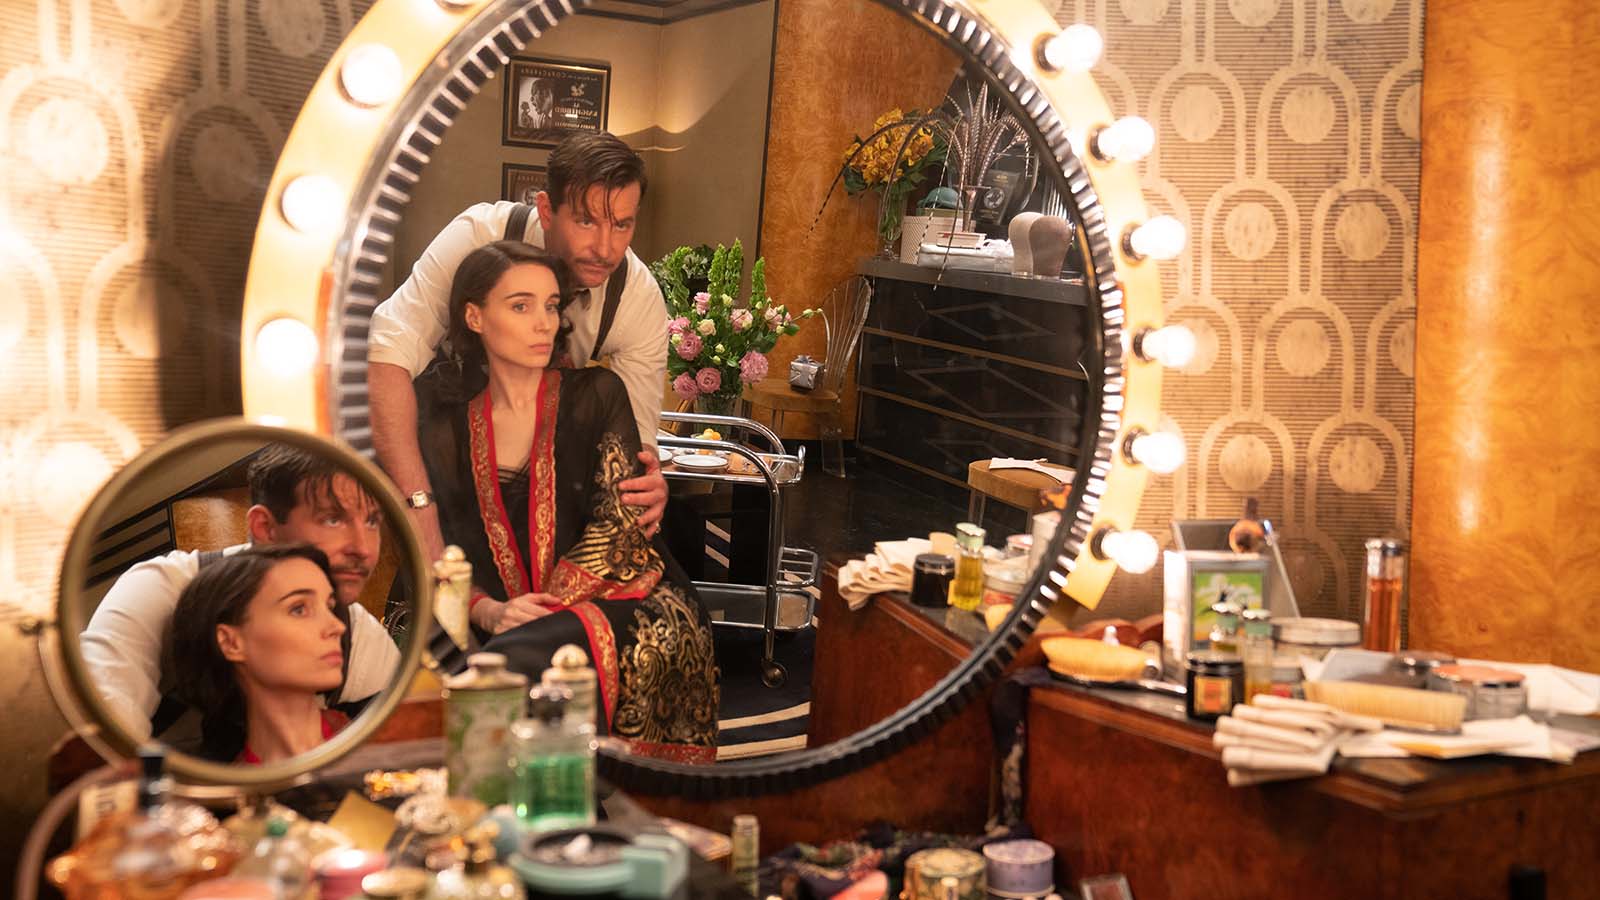 Molly (Rooney Mara) and Stanton (Bradley Cooper) prepare for a show. Image © Searchlight Pictures